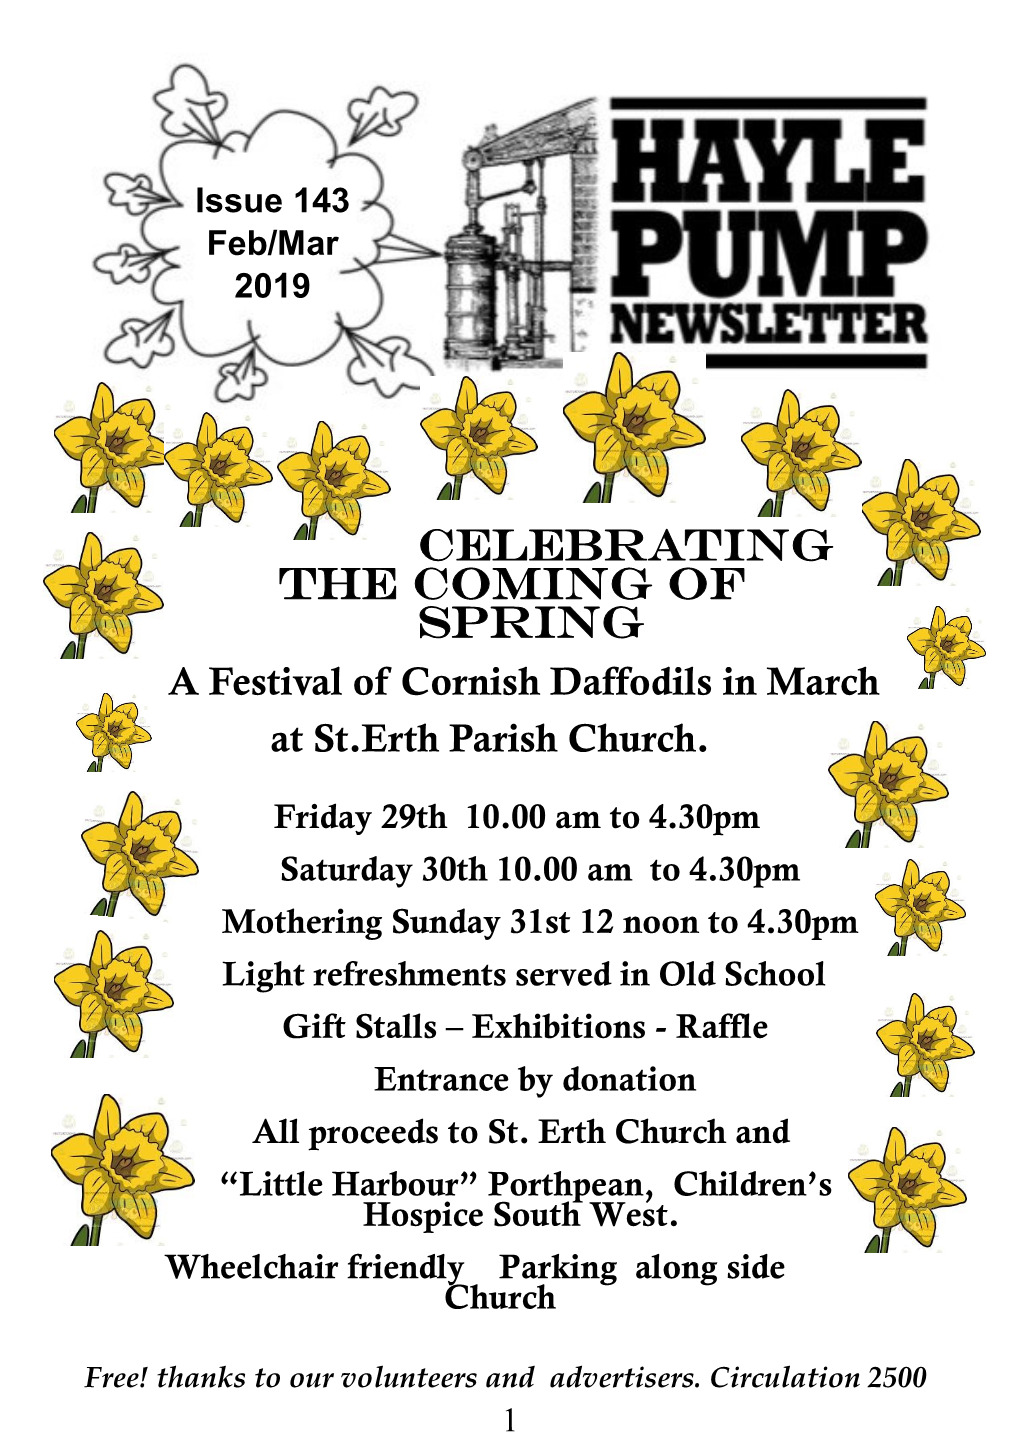 Celebrating the Coming of Spring a Festival of Cornish Daffodils in March at St.Erth Parish Church